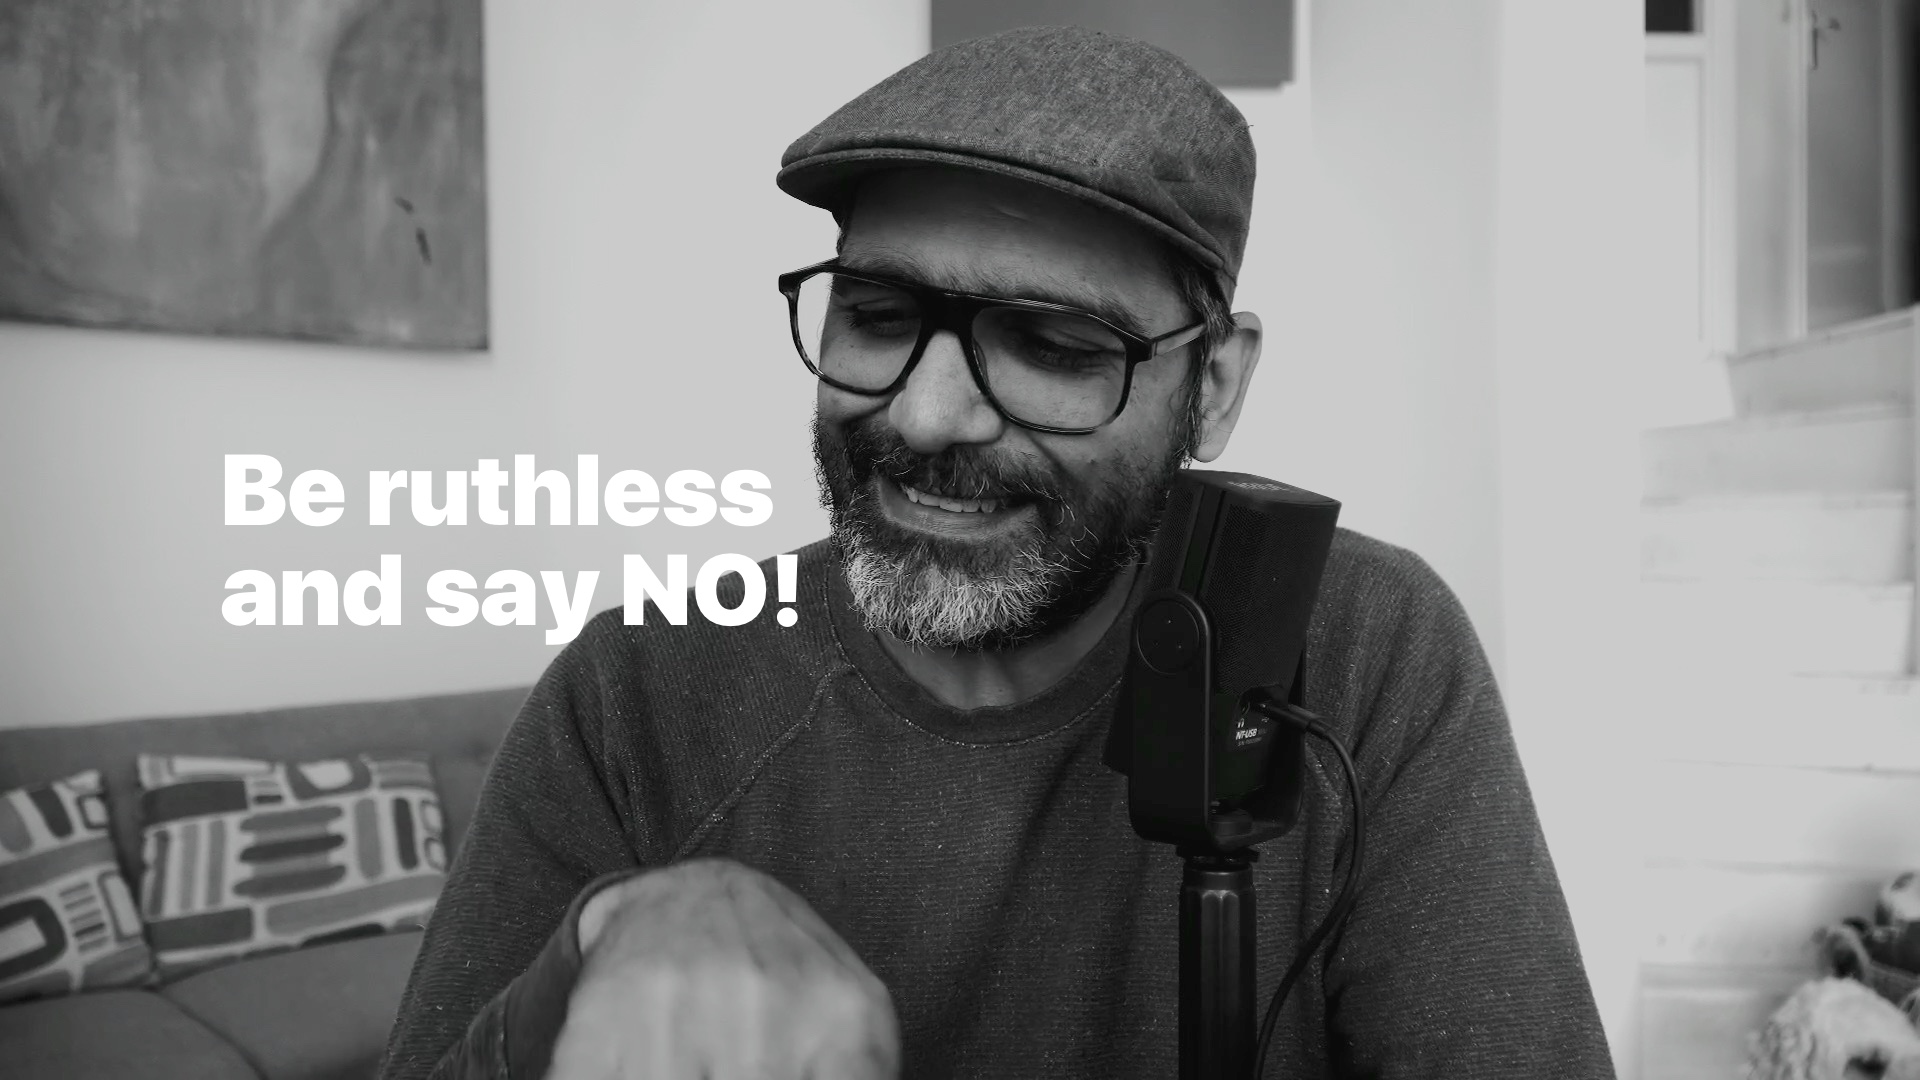 Be ruthless and say NO!